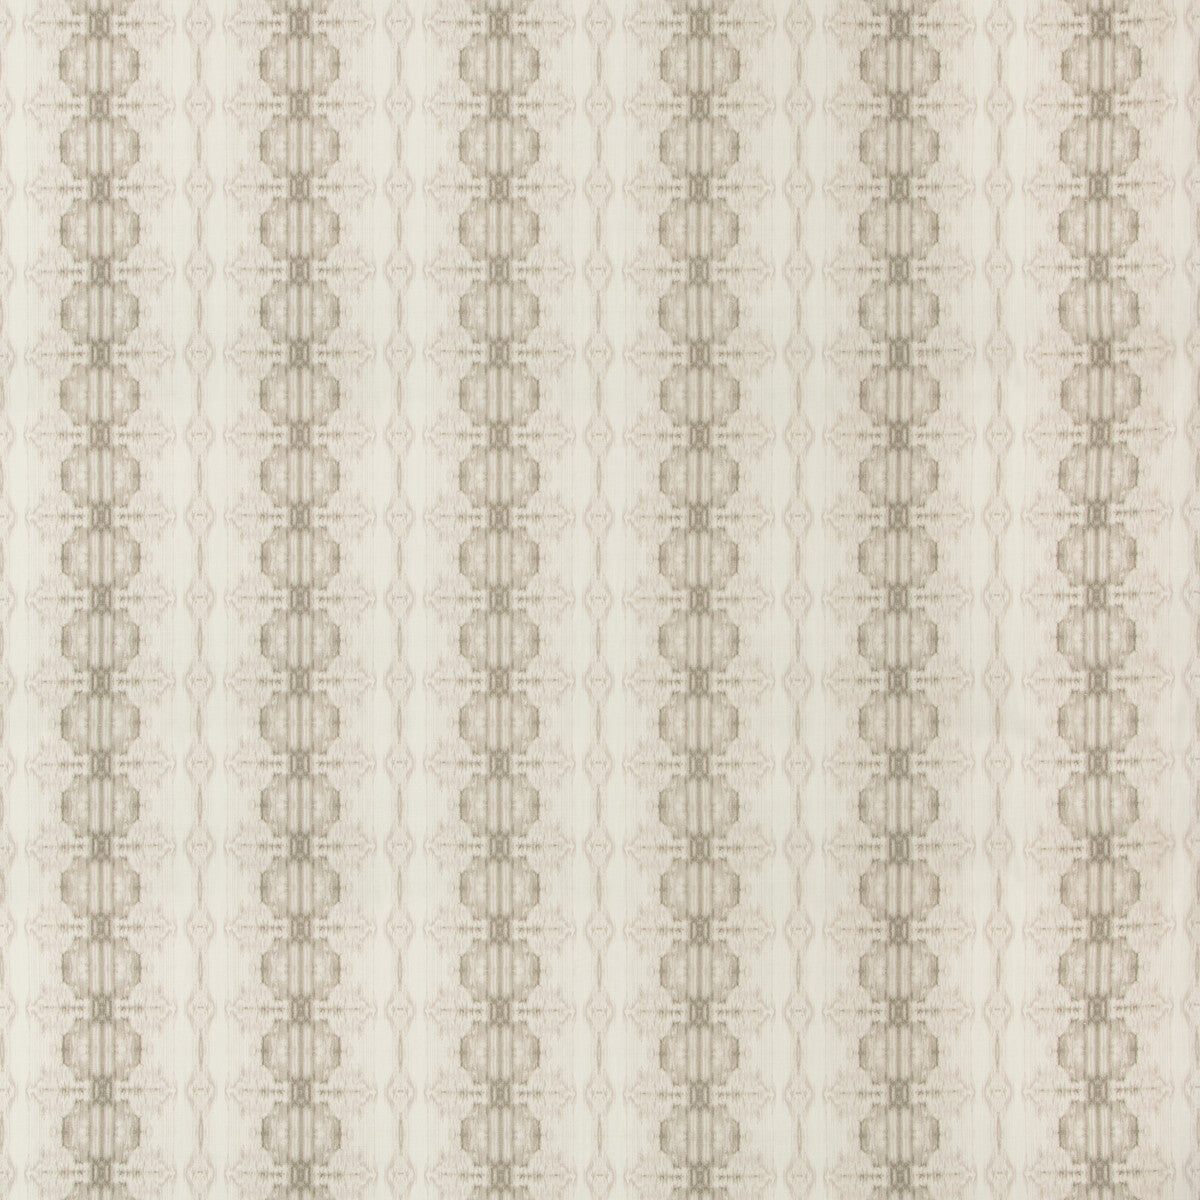 Goldie fabric in linen color - pattern GOLDIE.11.0 - by Kravet Design in the Barry Lantz Canvas To Cloth collection